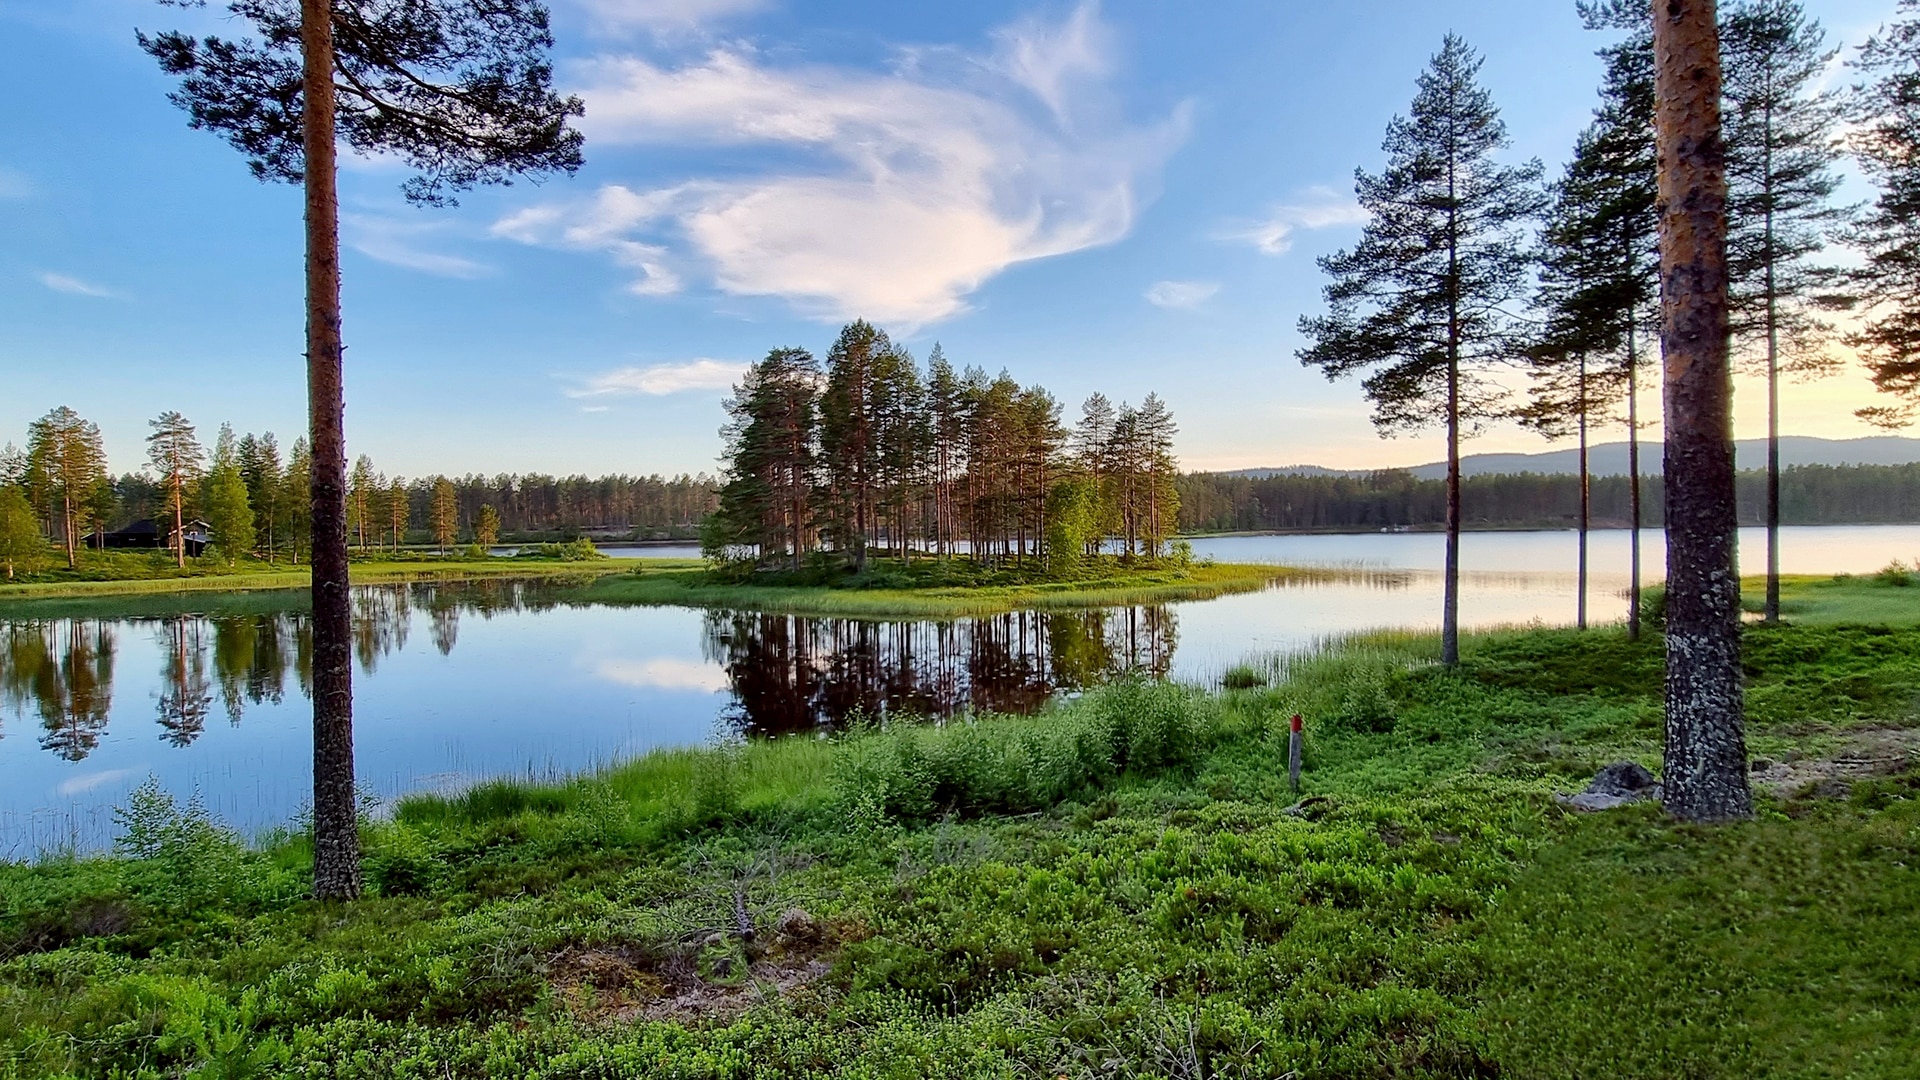 Trees growing on a small island reflecting in the water surface of the lake in Finnskogen.